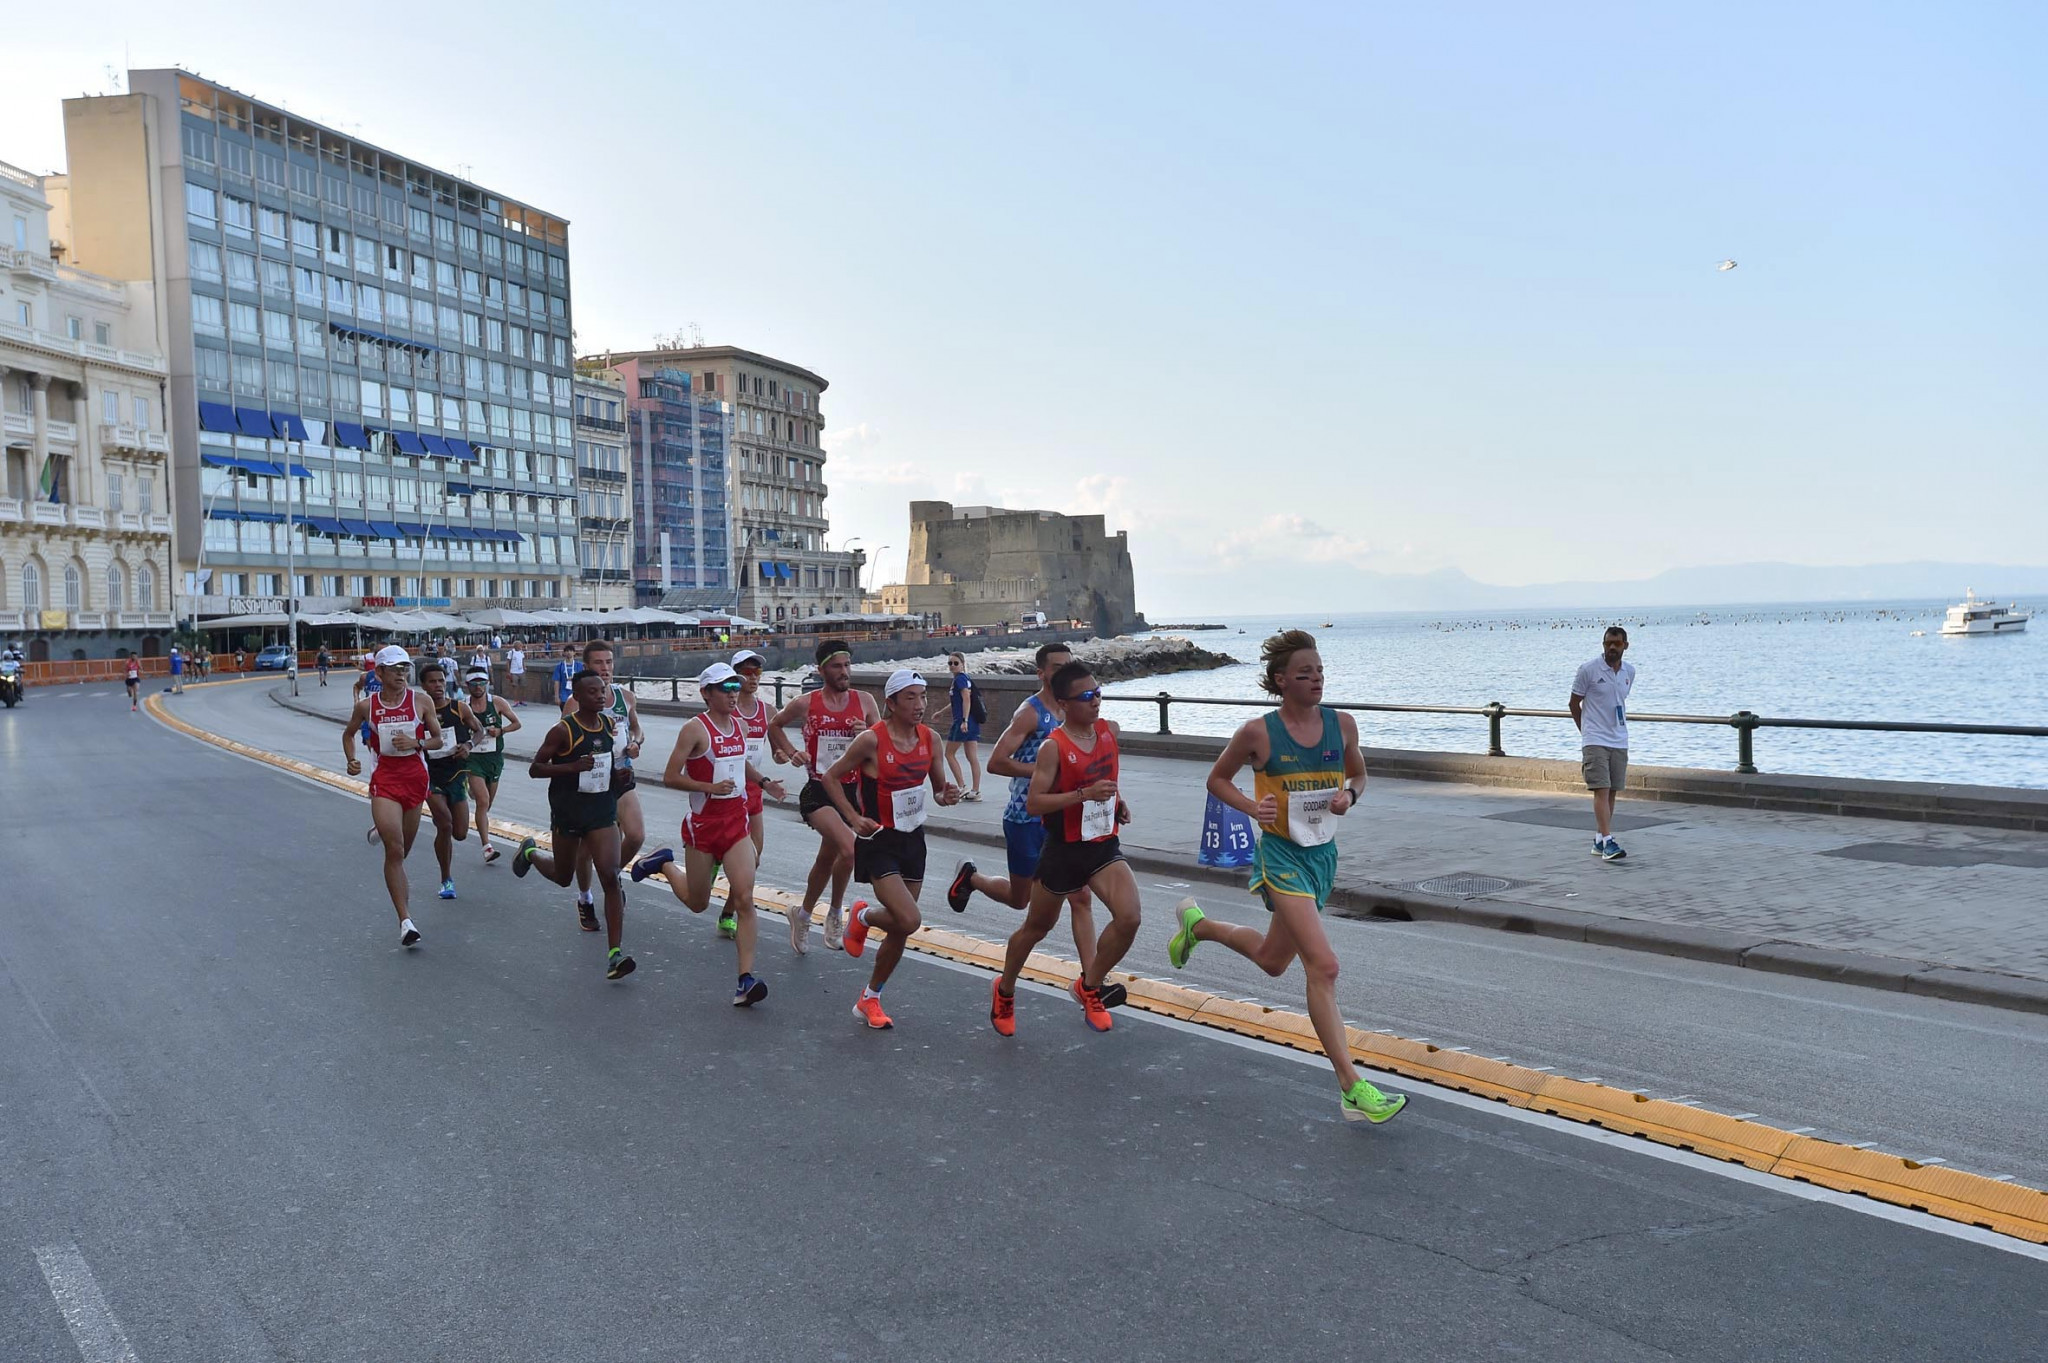 Chinese disqualification for breaking IAAF refreshment rules gives Japanese Naples 2019 half-marathon clean sweep 